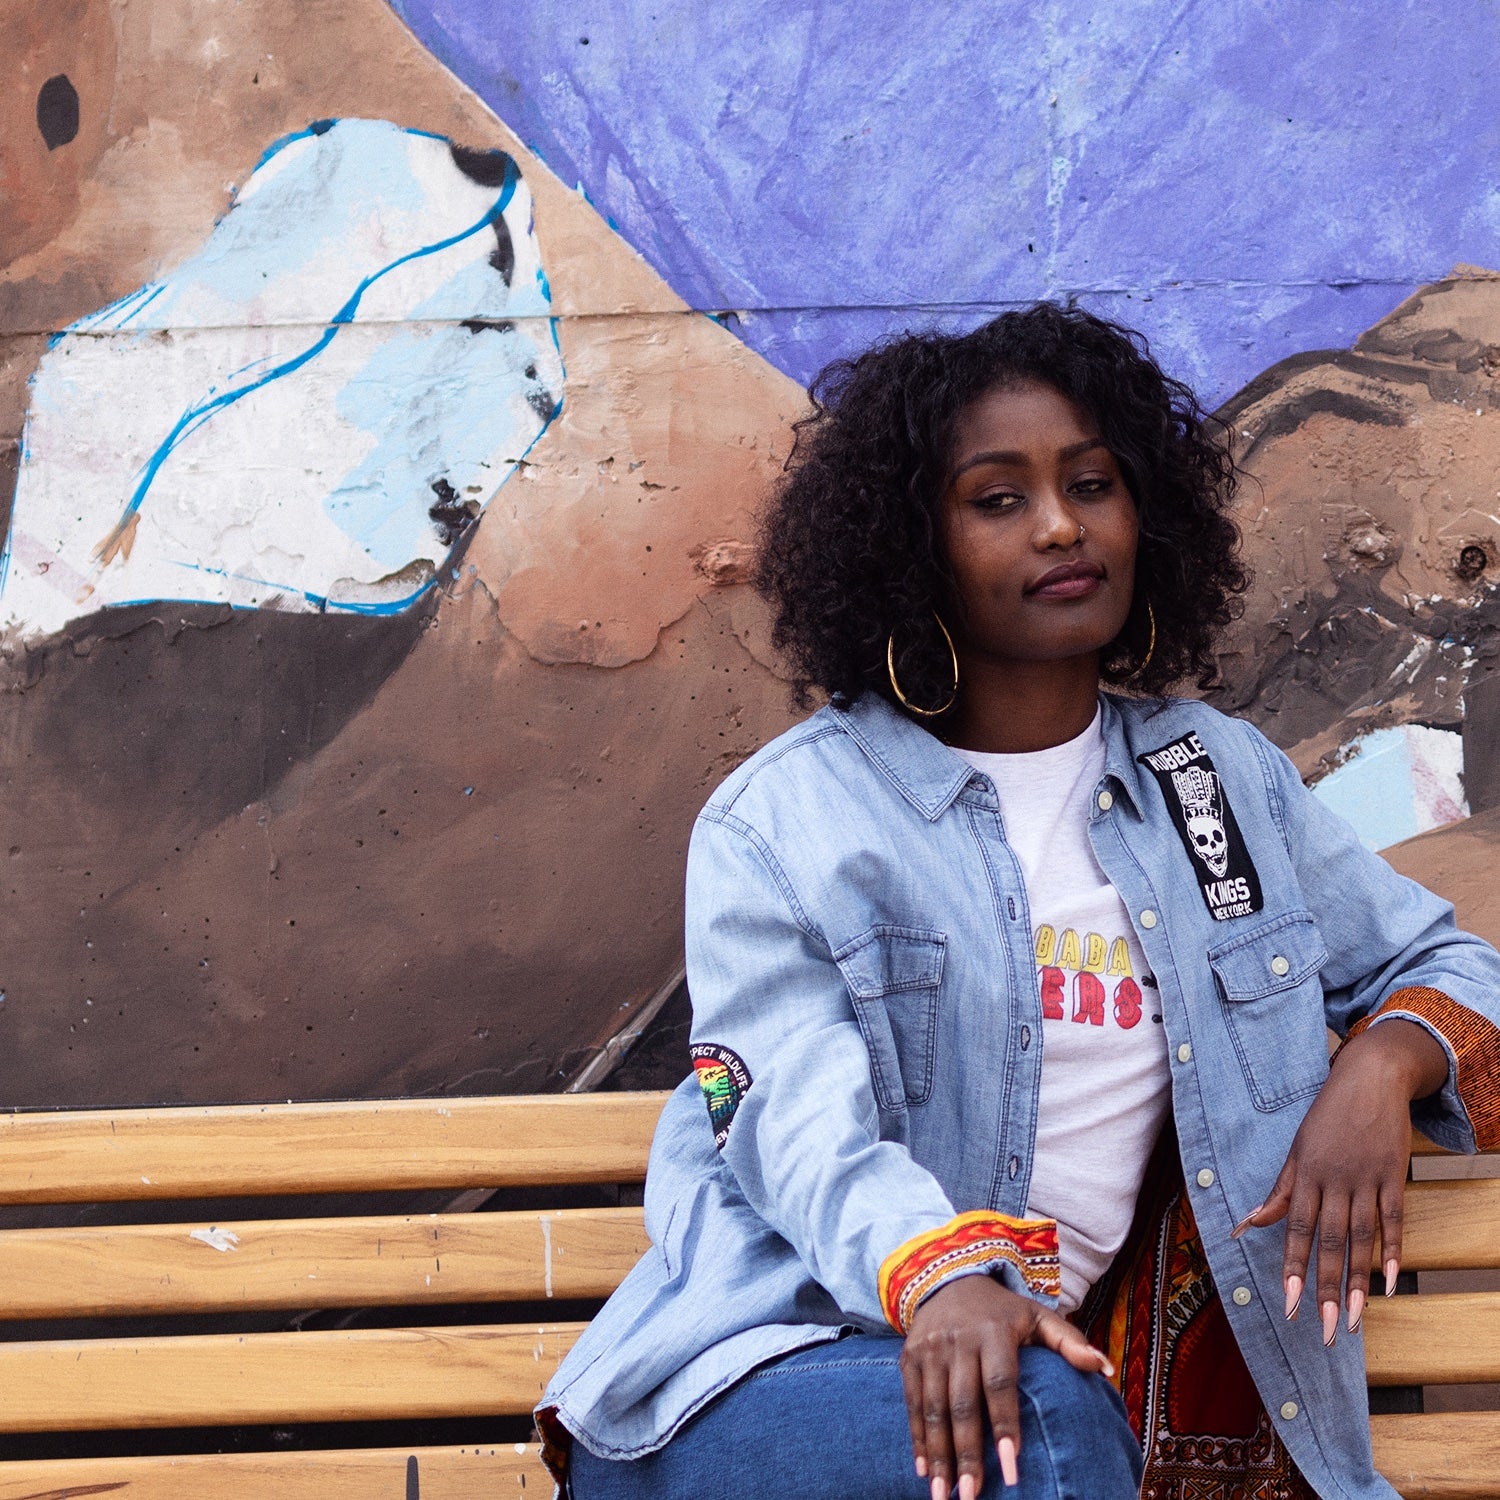 Africology's Upcycled Jackets: Bridging Continents, Sharing Stories